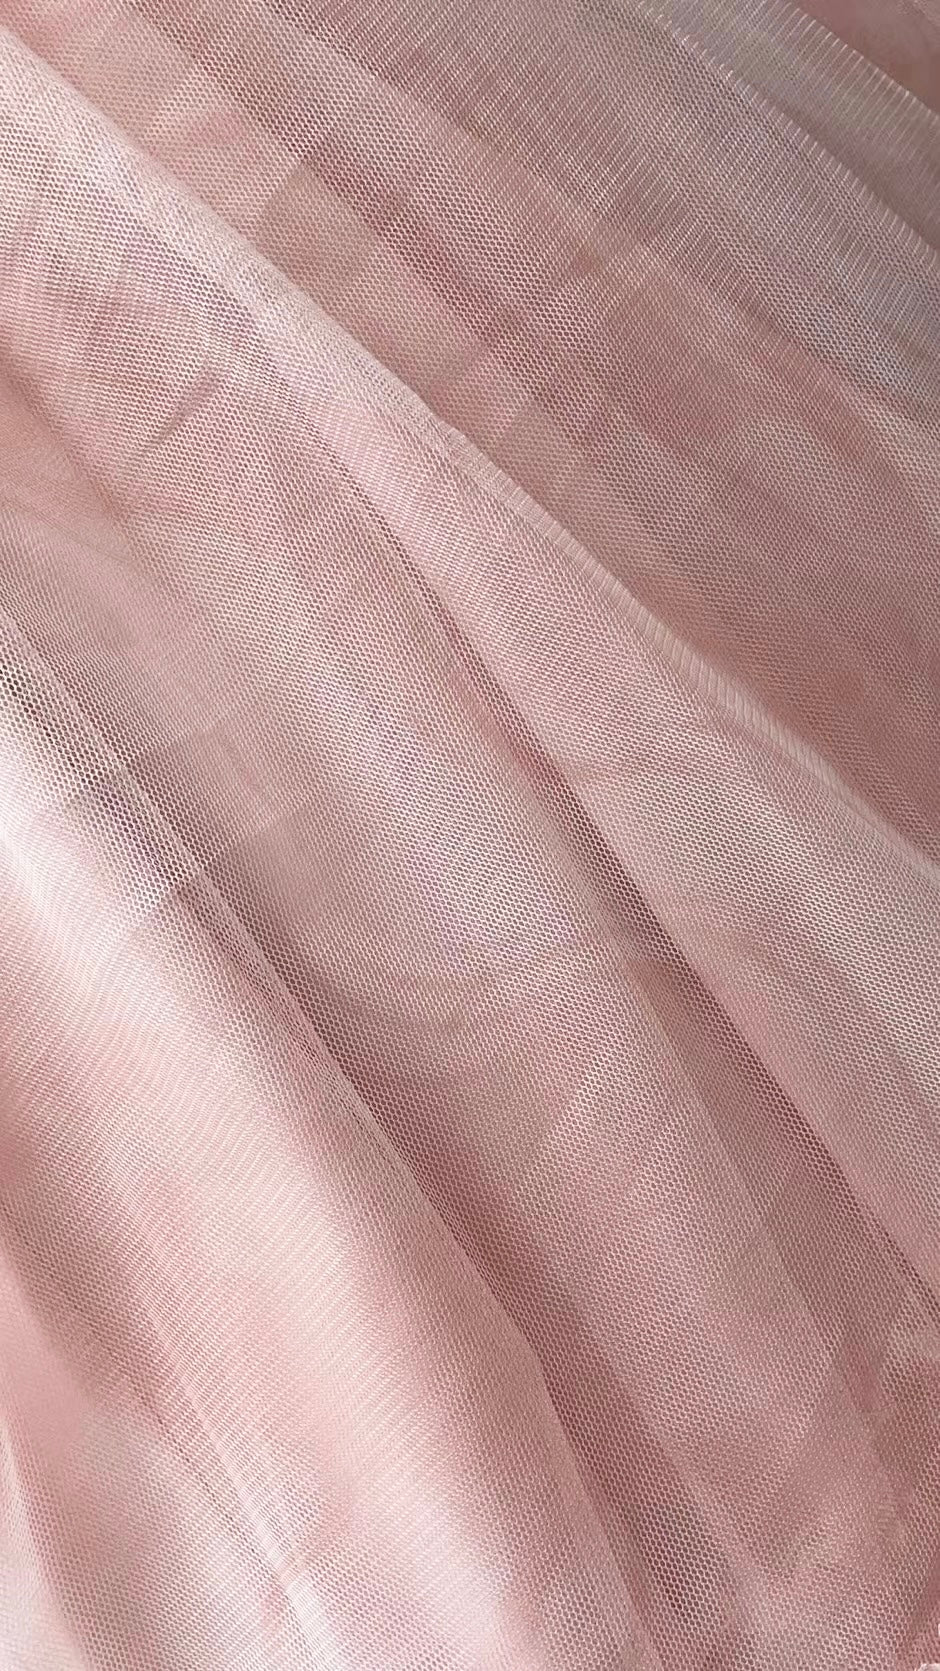 DOLLY® DREAMY DANCING CLOUDS HIGH-LOW TUTU SKIRT pink clouds ☁️